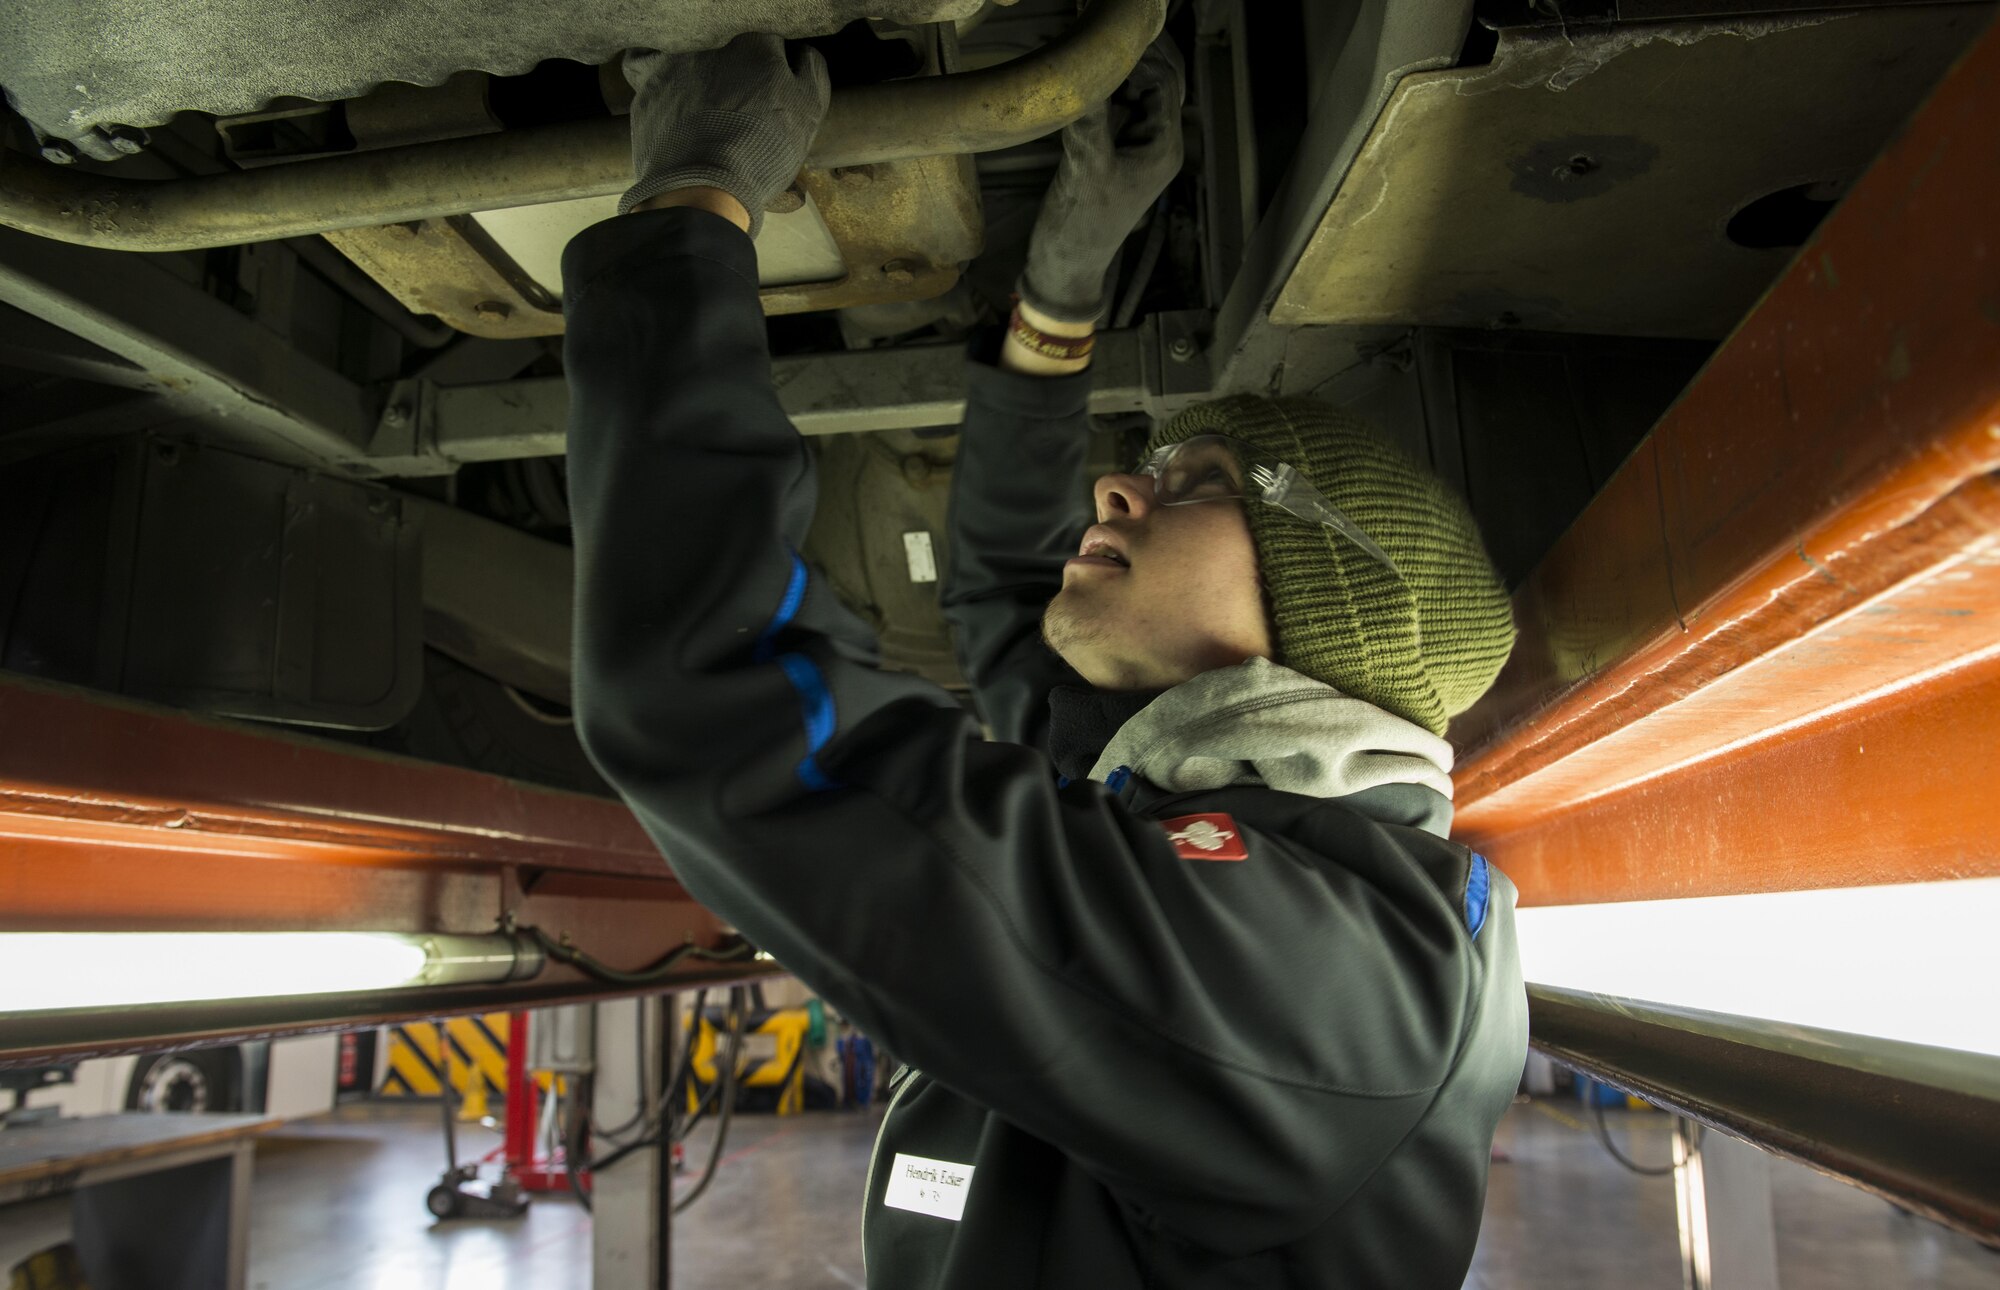 Hendrik Ecker, 86th Vehicle Readiness Squadron vehicle mechanic technician, works on the undercarriage of a bus at Ramstein Air Base, Germany, Nov. 14, 2016. Ecker was partnered the 86th VRS through Ramstein’s Local National Apprenticeship program, which is designed to mirror the German vocational system and provide practical hands-on skills as well as classroom education for young adults. He was one of 21 local nationals to be chosen for the program. (U.S. Air Force photo by Senior Airman Tryphena Mayhugh)